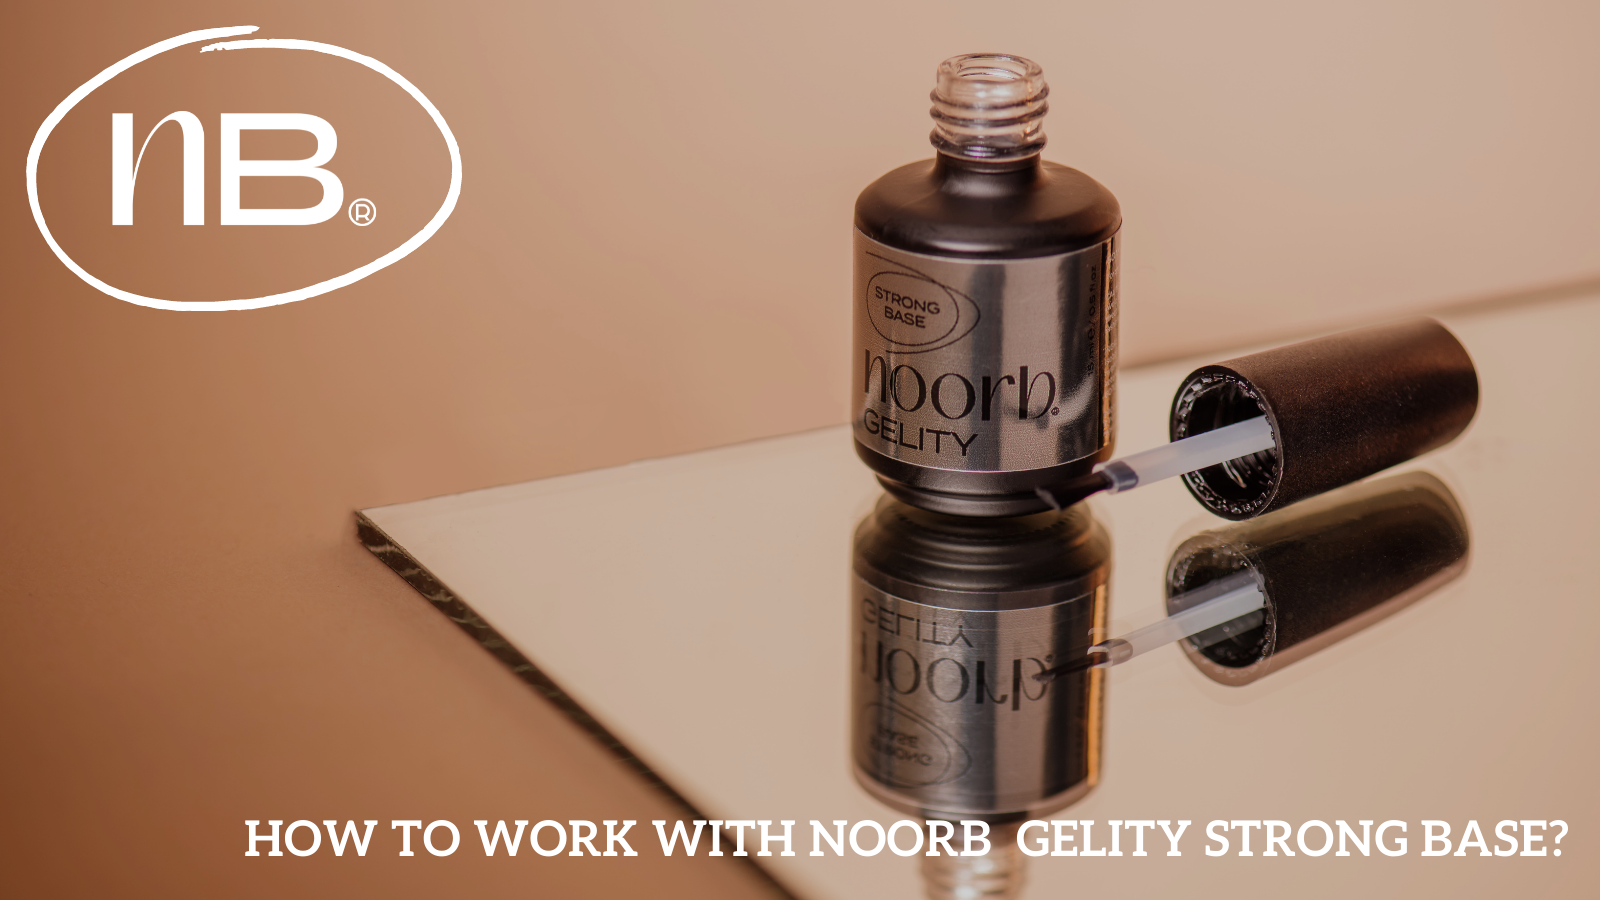 How to work with noorb gelity strong base?